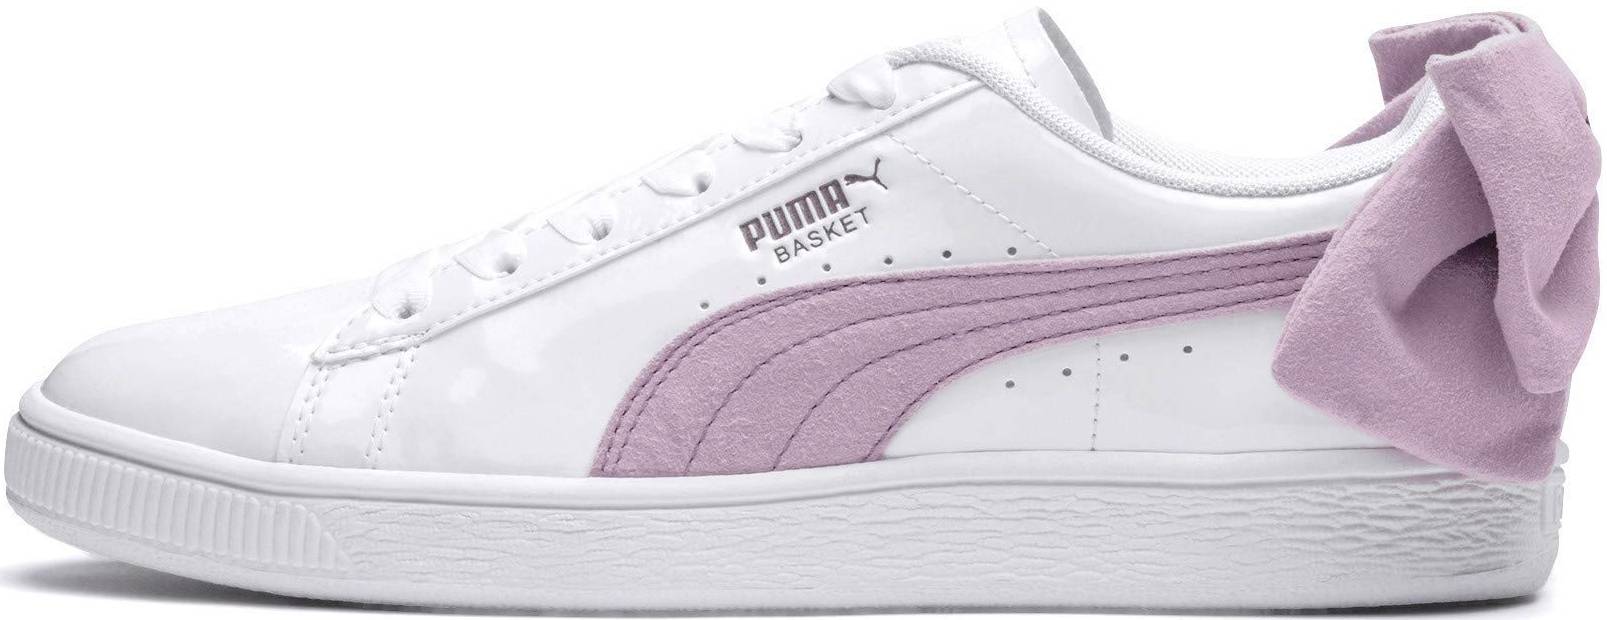 Puma Suede Bow sneakers in 4 colors (only $22) | RunRepeat